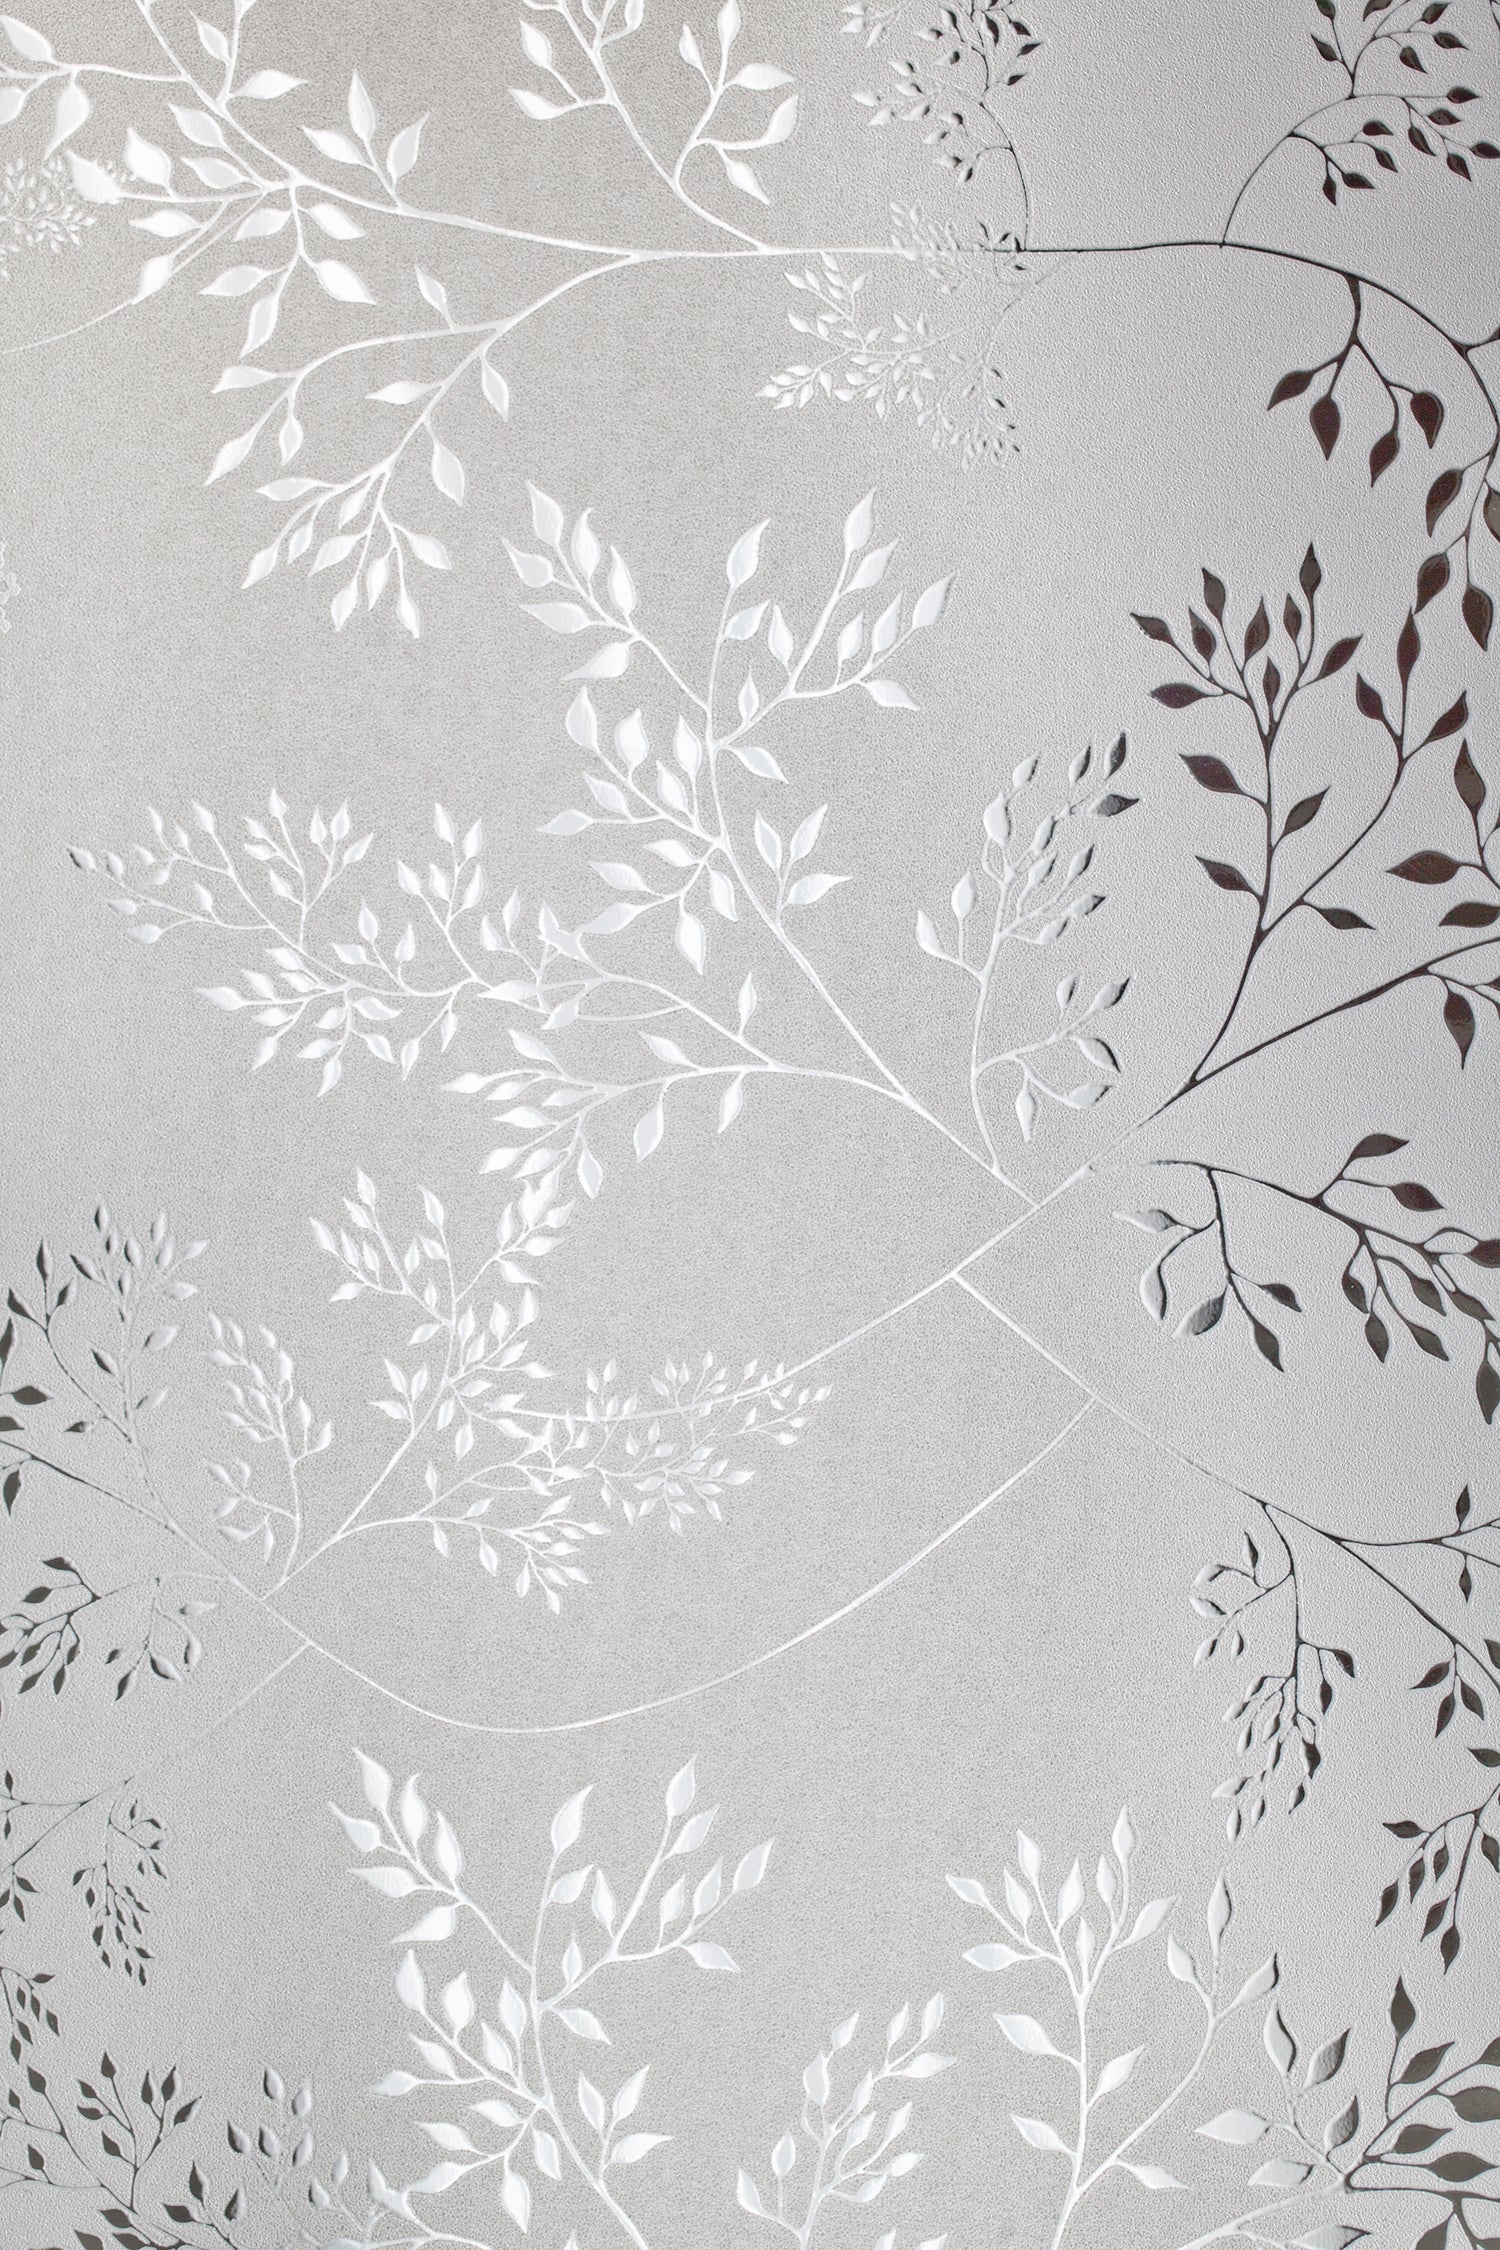 A detail image of the Elderberry window film by Artscape.